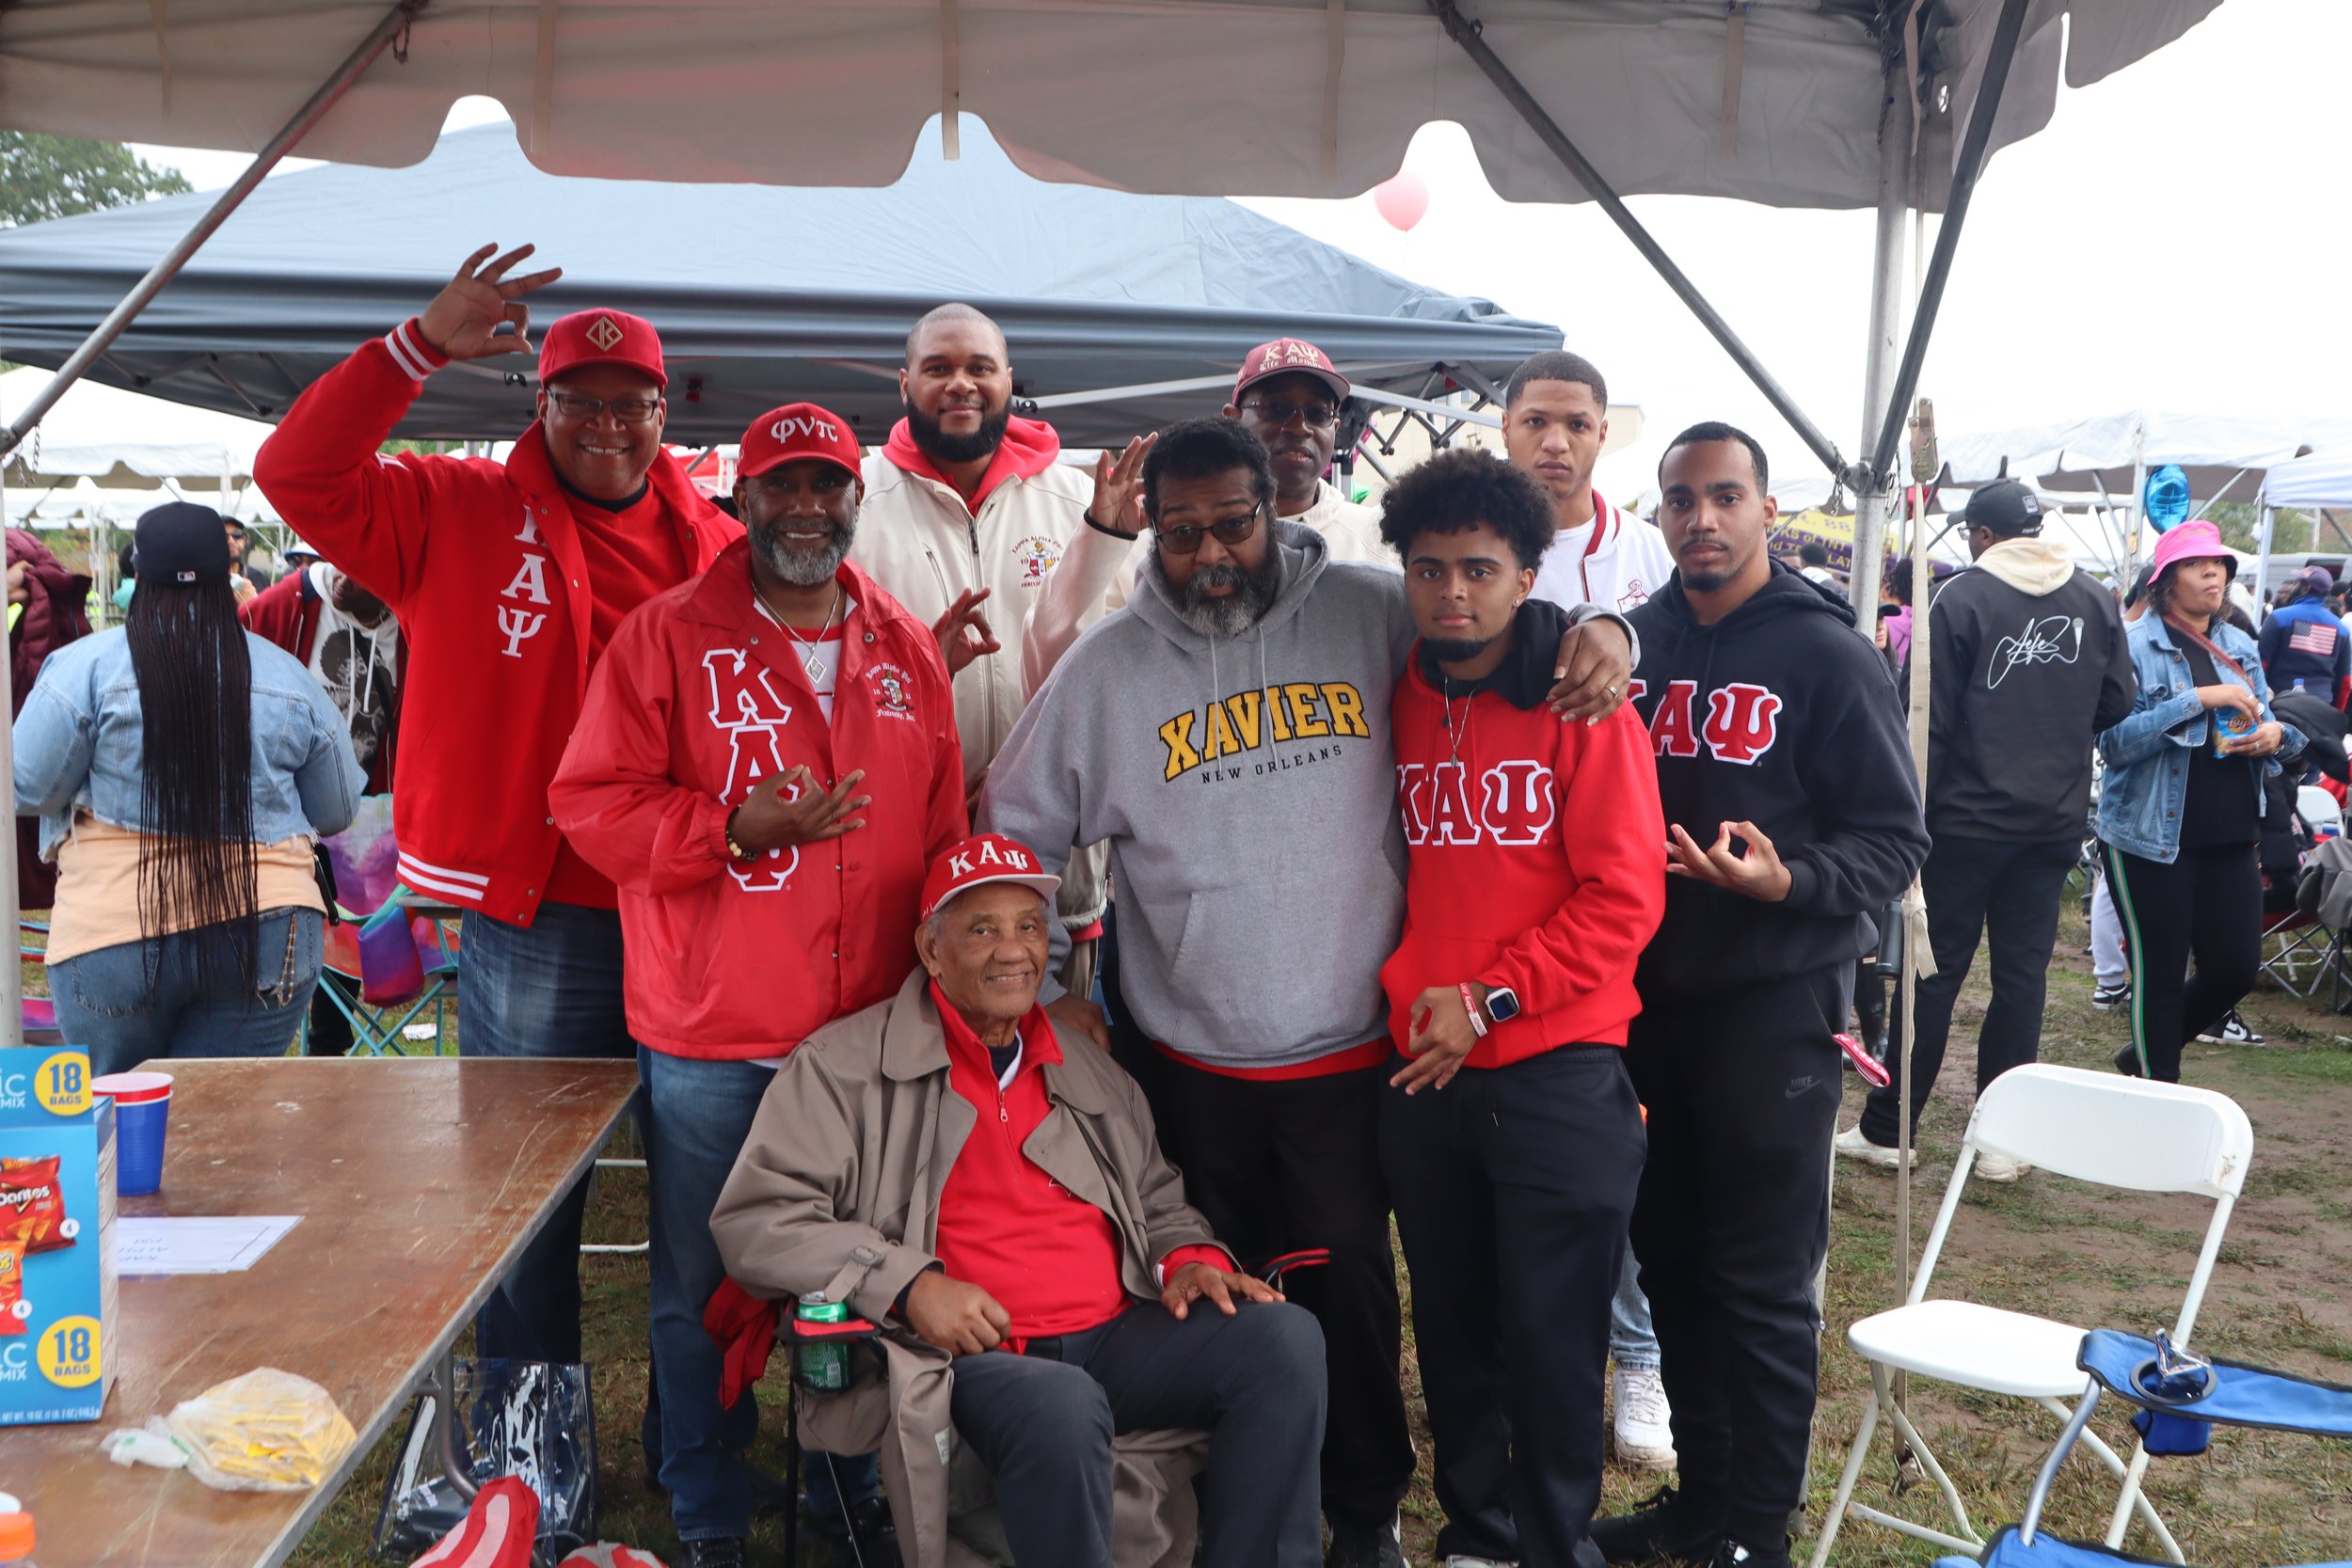 Brothers taking a group photo at the tailgate